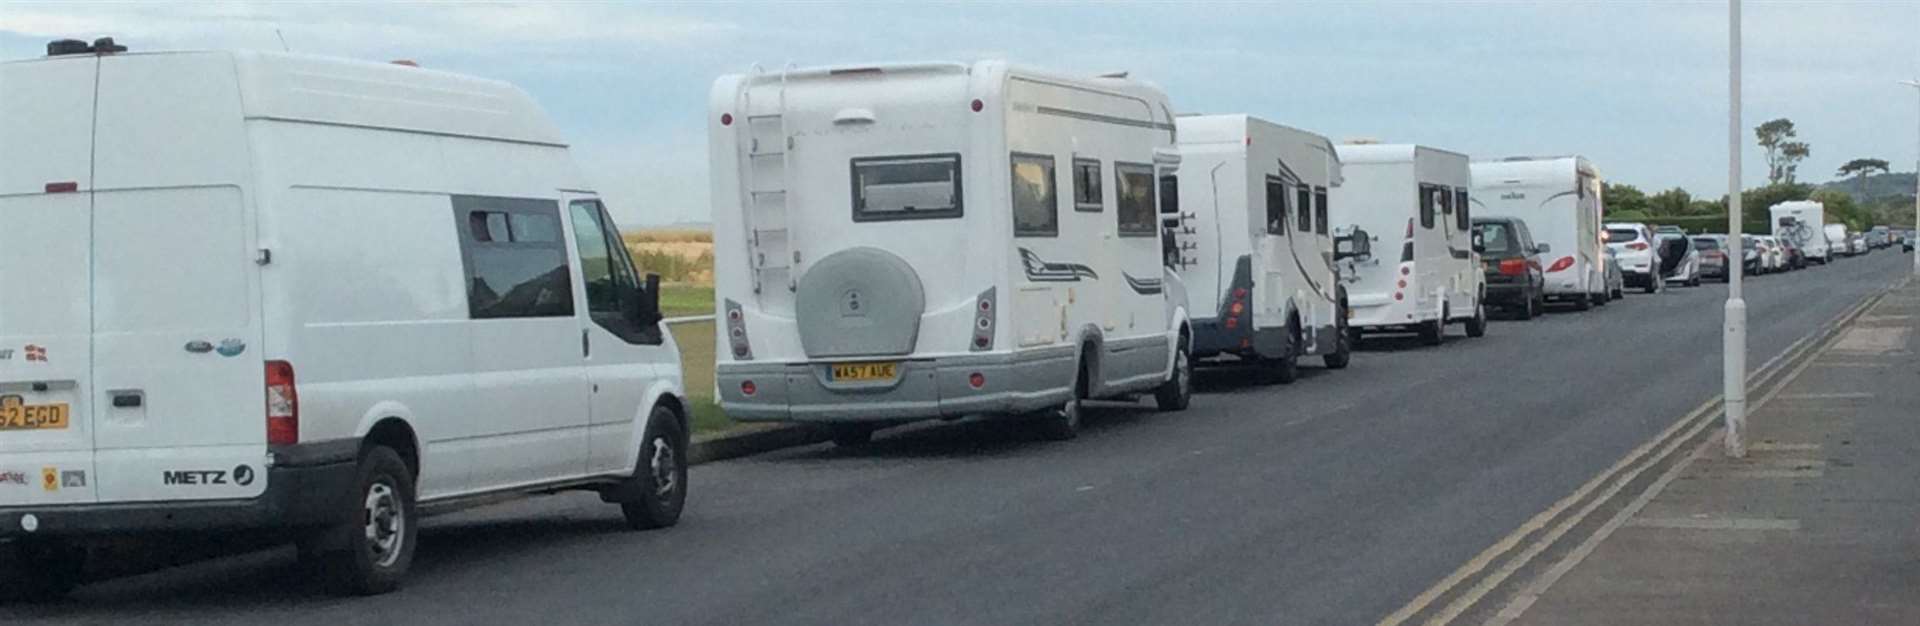 Motorhomes lined The Beach, taking up many spaces for residents and visitors Picture: Alan Bailey